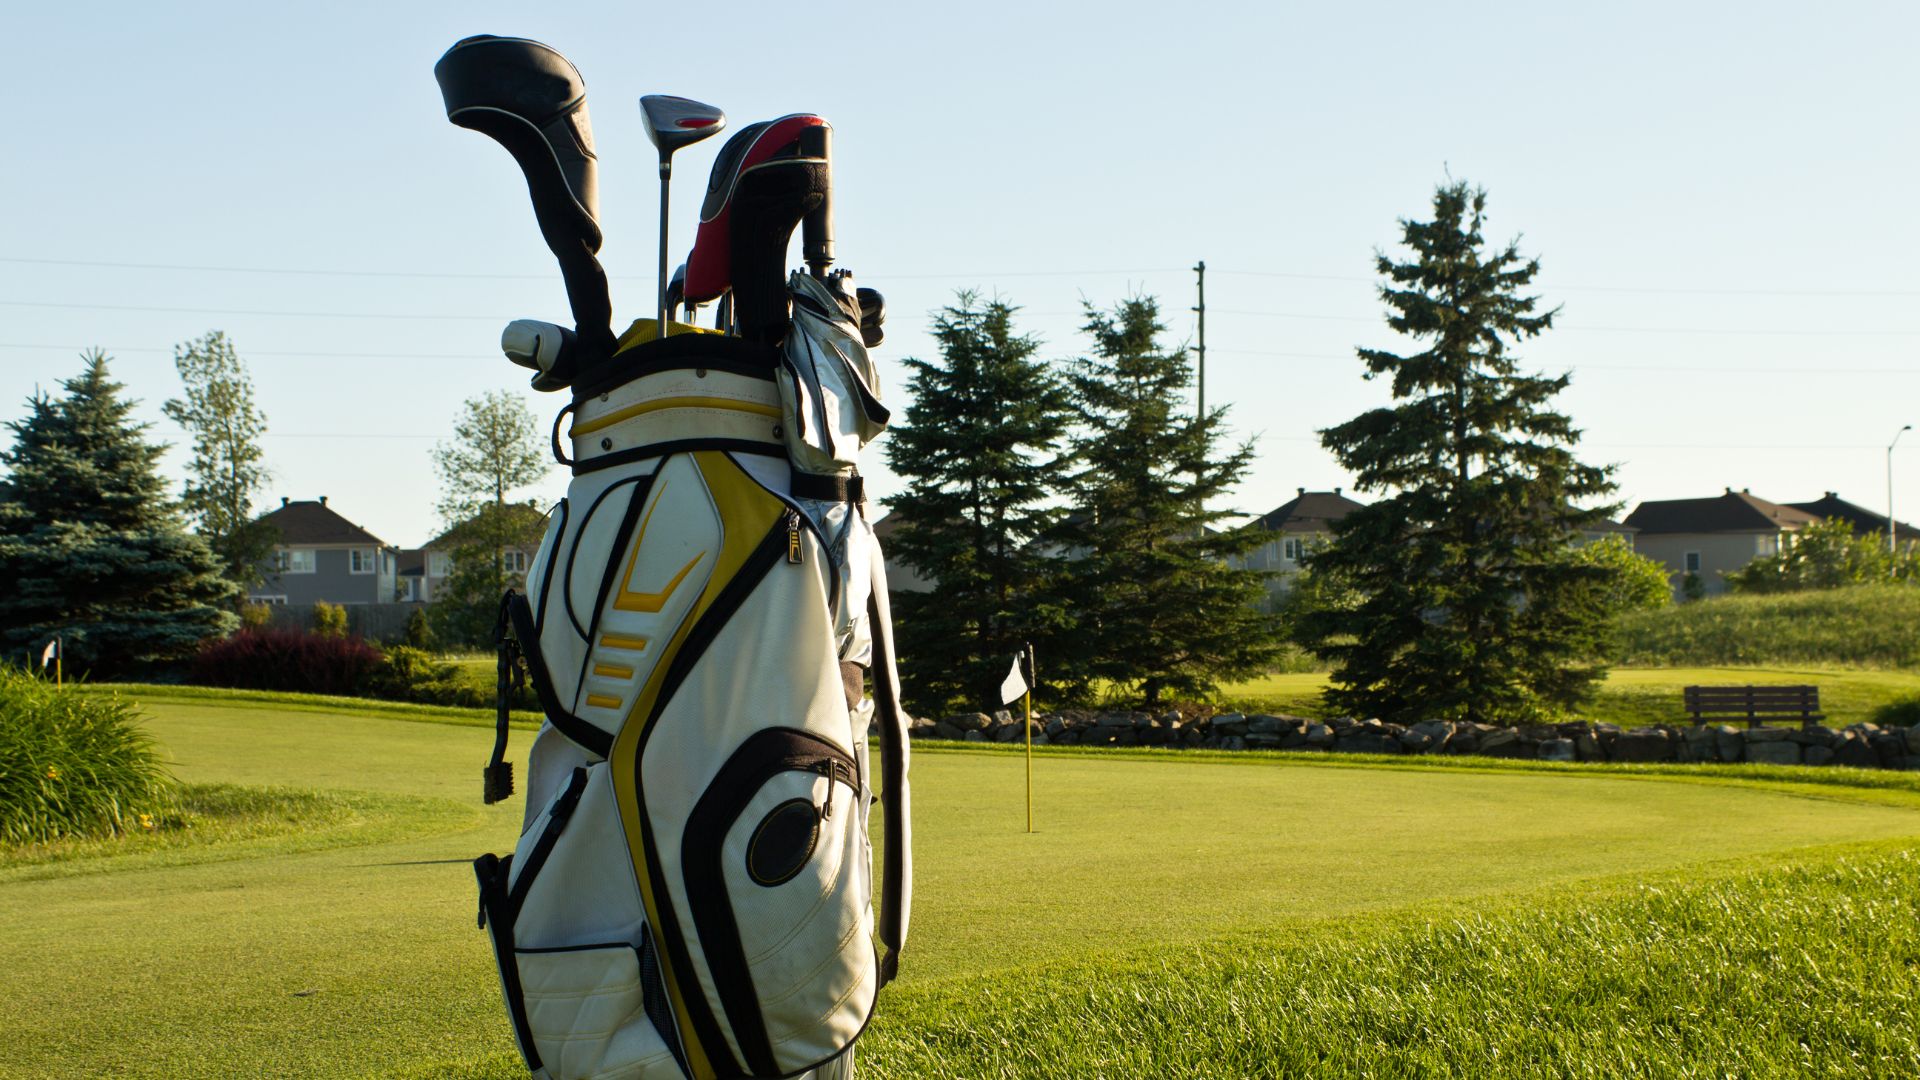 Discover expert tips on how to organize your golf bag for an efficient, stress-free round. Enhance your game with a perfectly arranged bag. Start now!